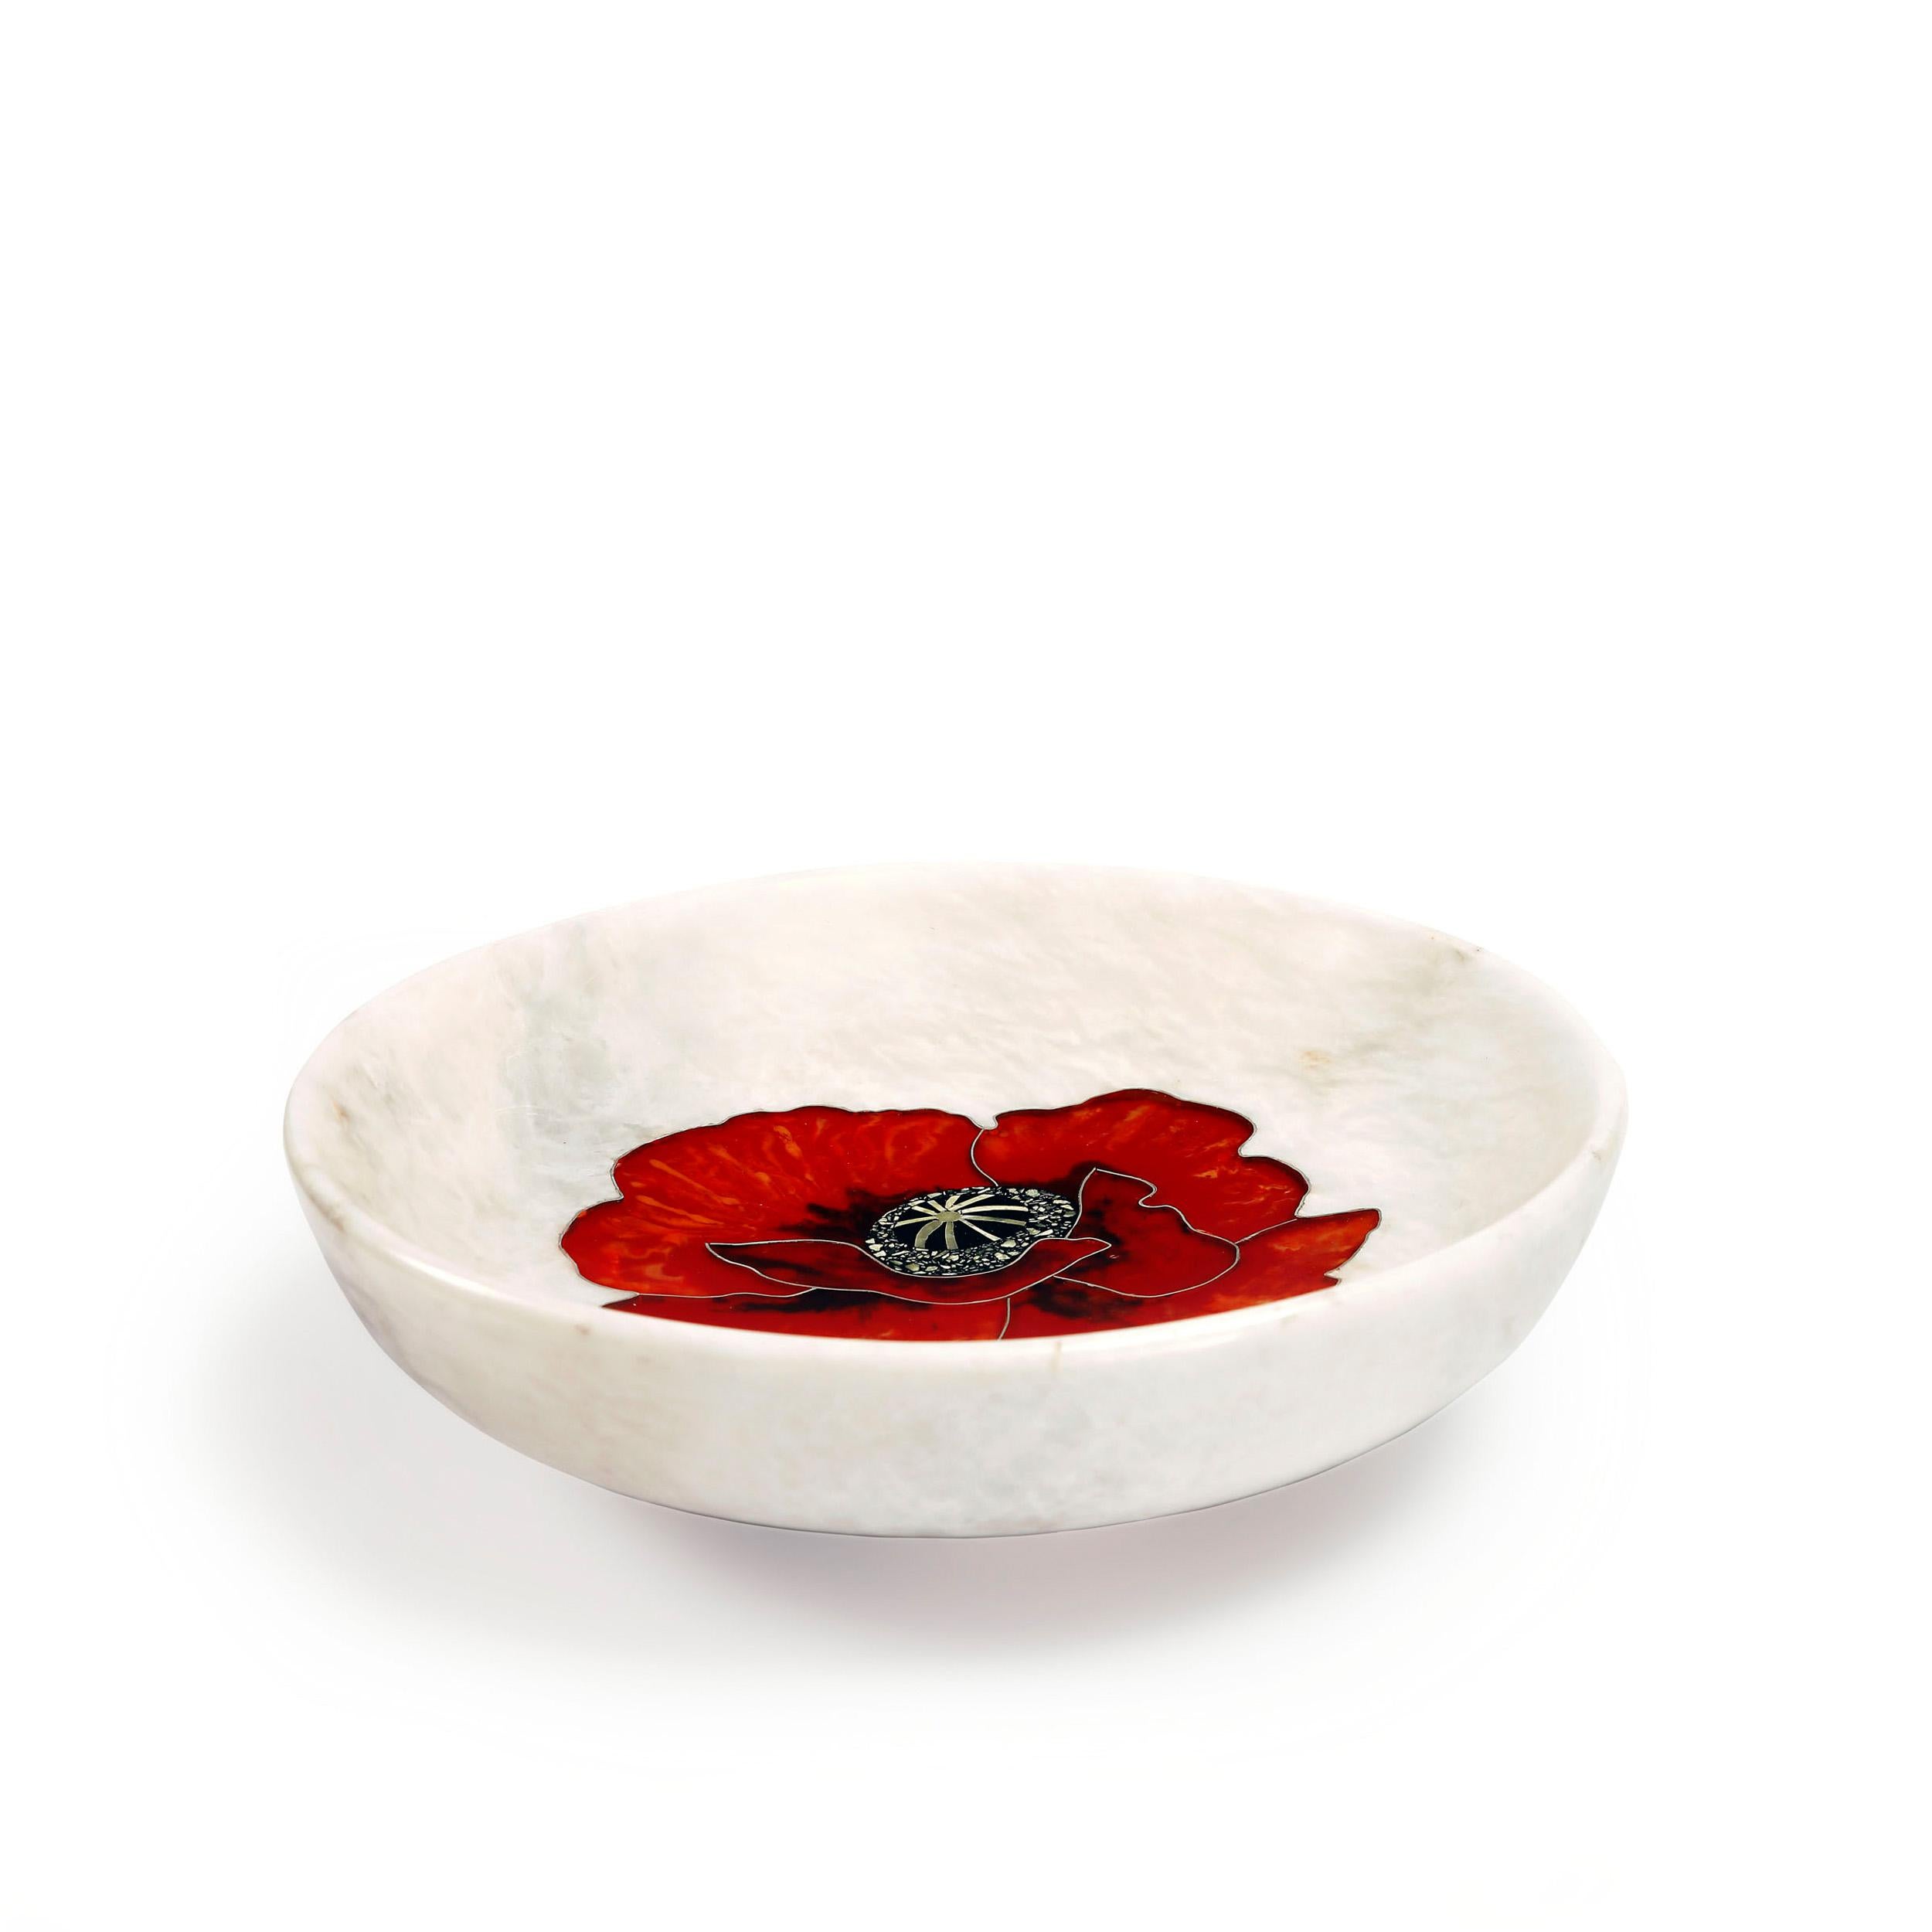 Reidi Bowl by Studio Lel
Dimensions: D25x W25 x H8 cm
Materials: Serpentine,Resin, Marble

The Reidi Collection takes its name from the Persian word for the poppy flower - marrying traditional craft techniques with contemporary design and